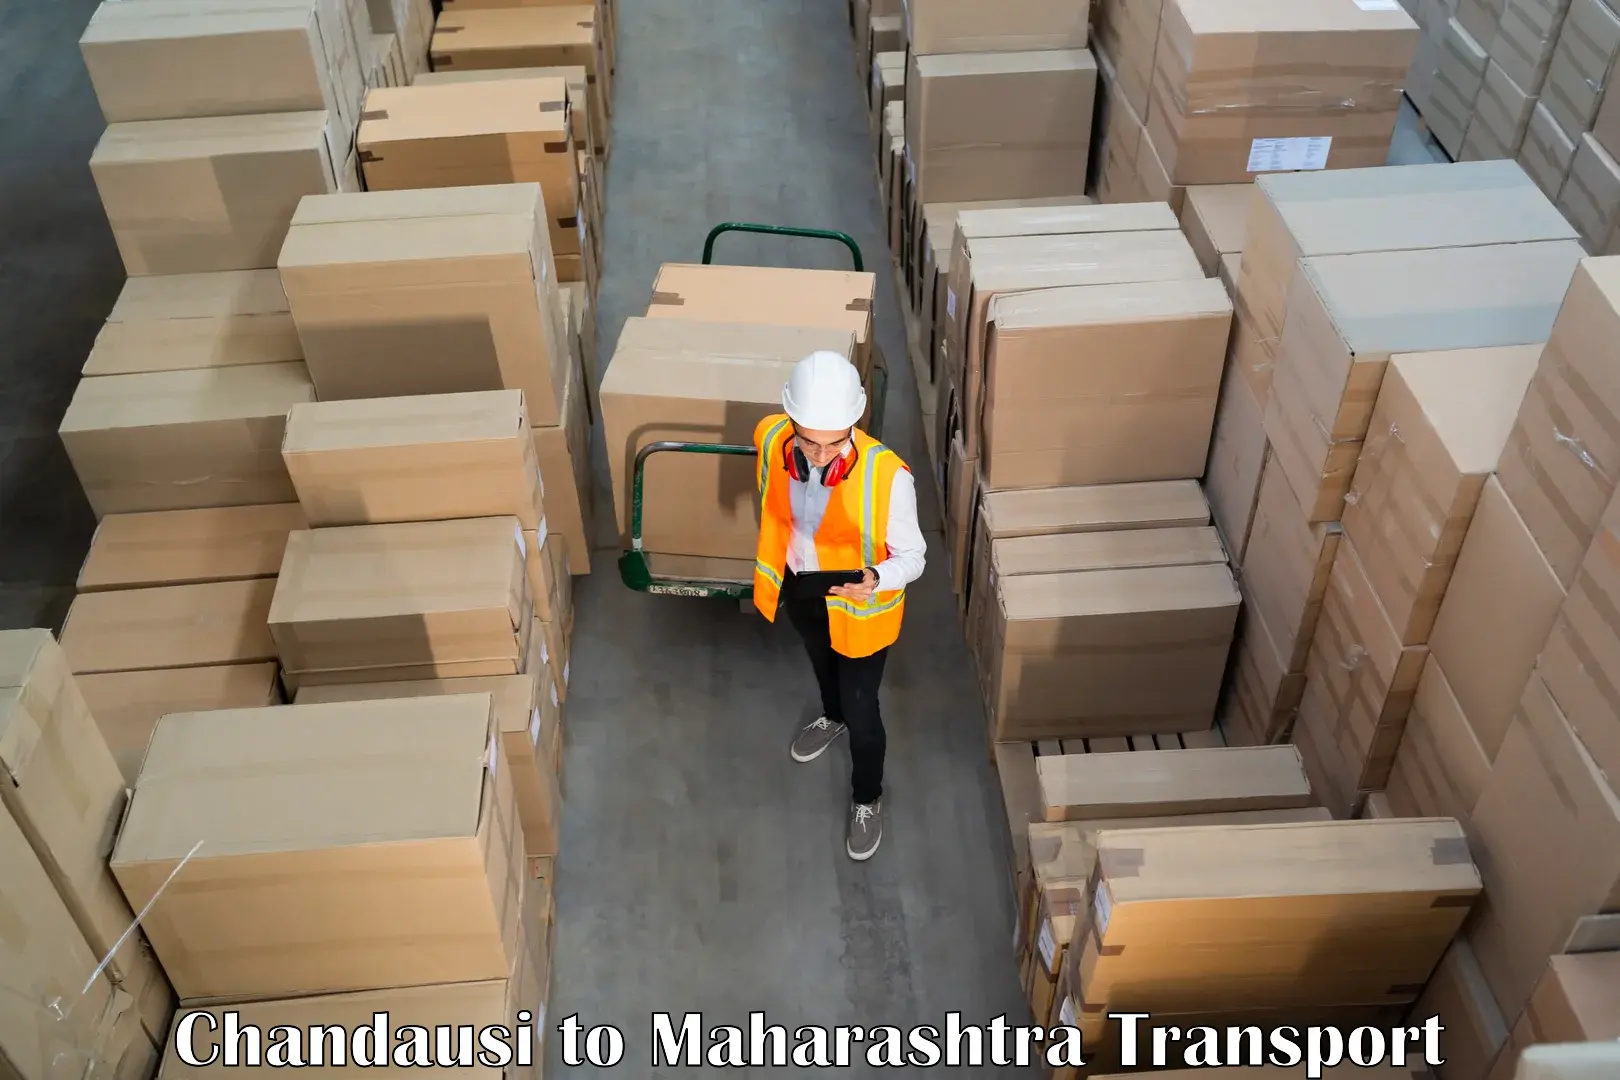 Daily parcel service transport in Chandausi to Dusarbid